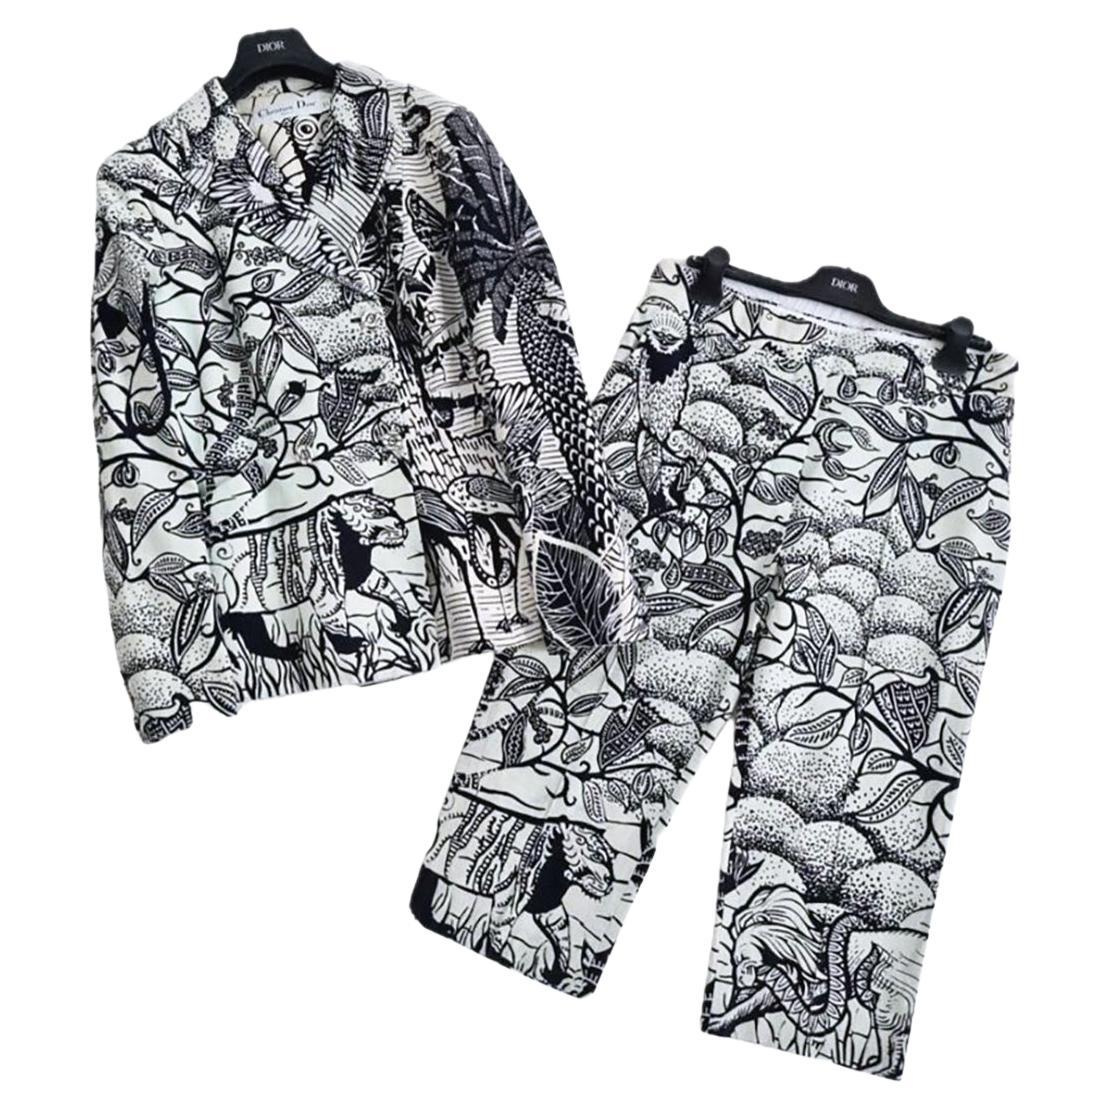 Dior Jungle Iconic Bar 30 Montaigne Jacket and Trousers Ensemble For Sale